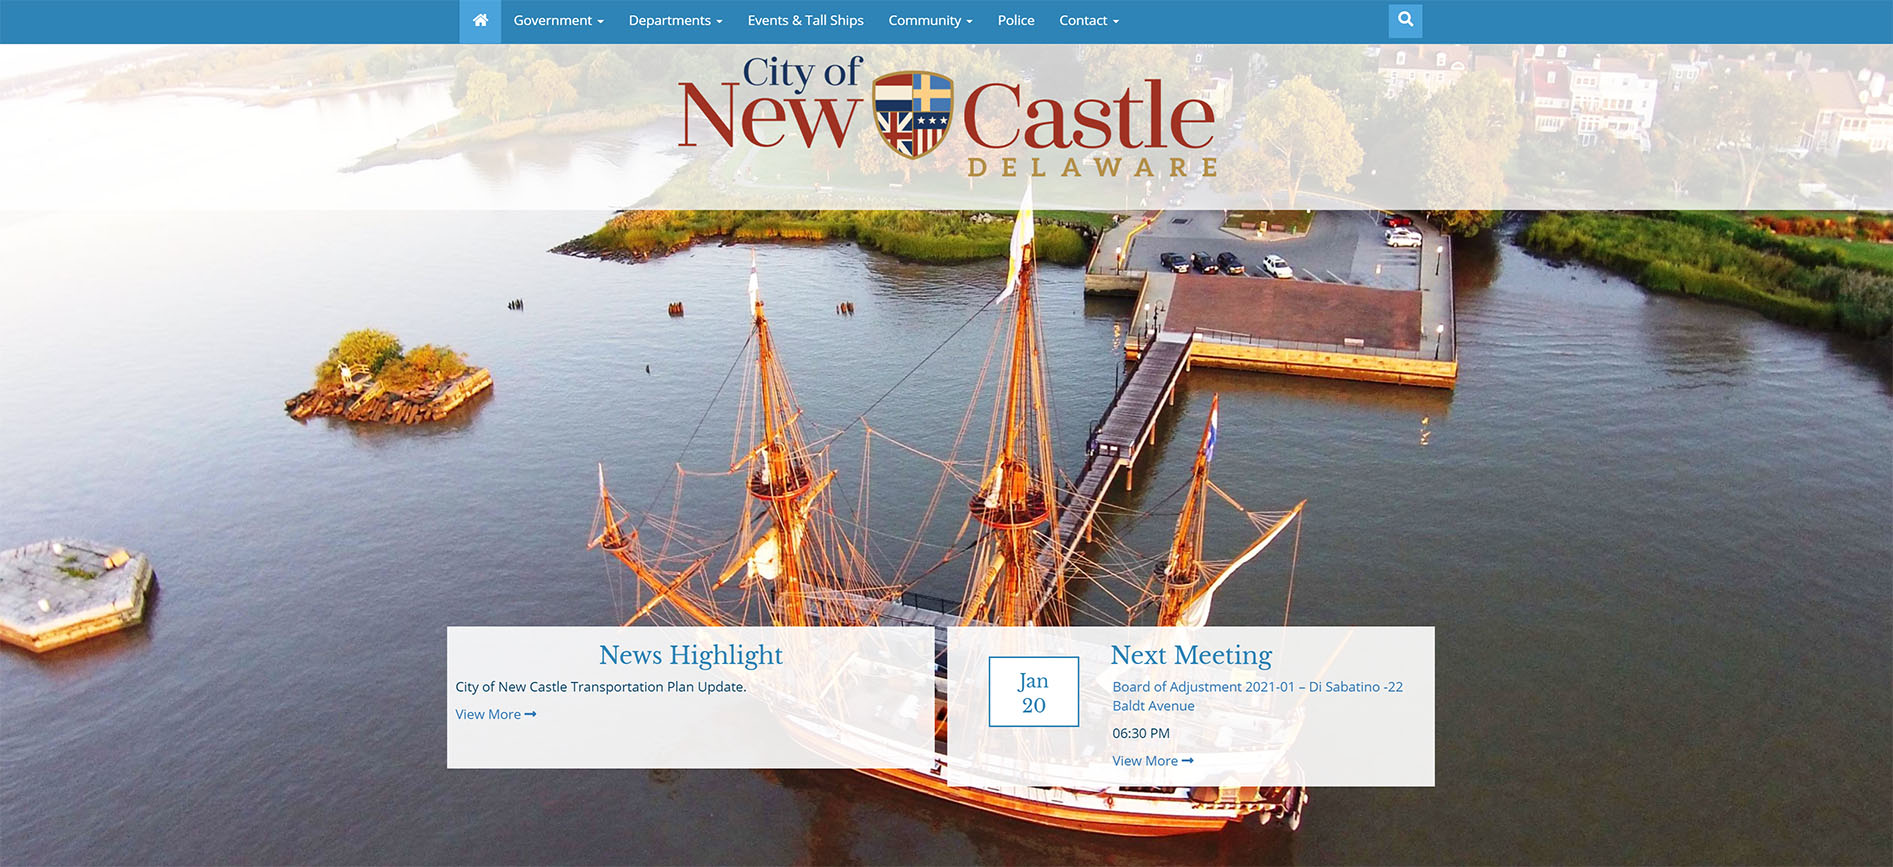 A picture of the of City of New Castle, Delaware's website